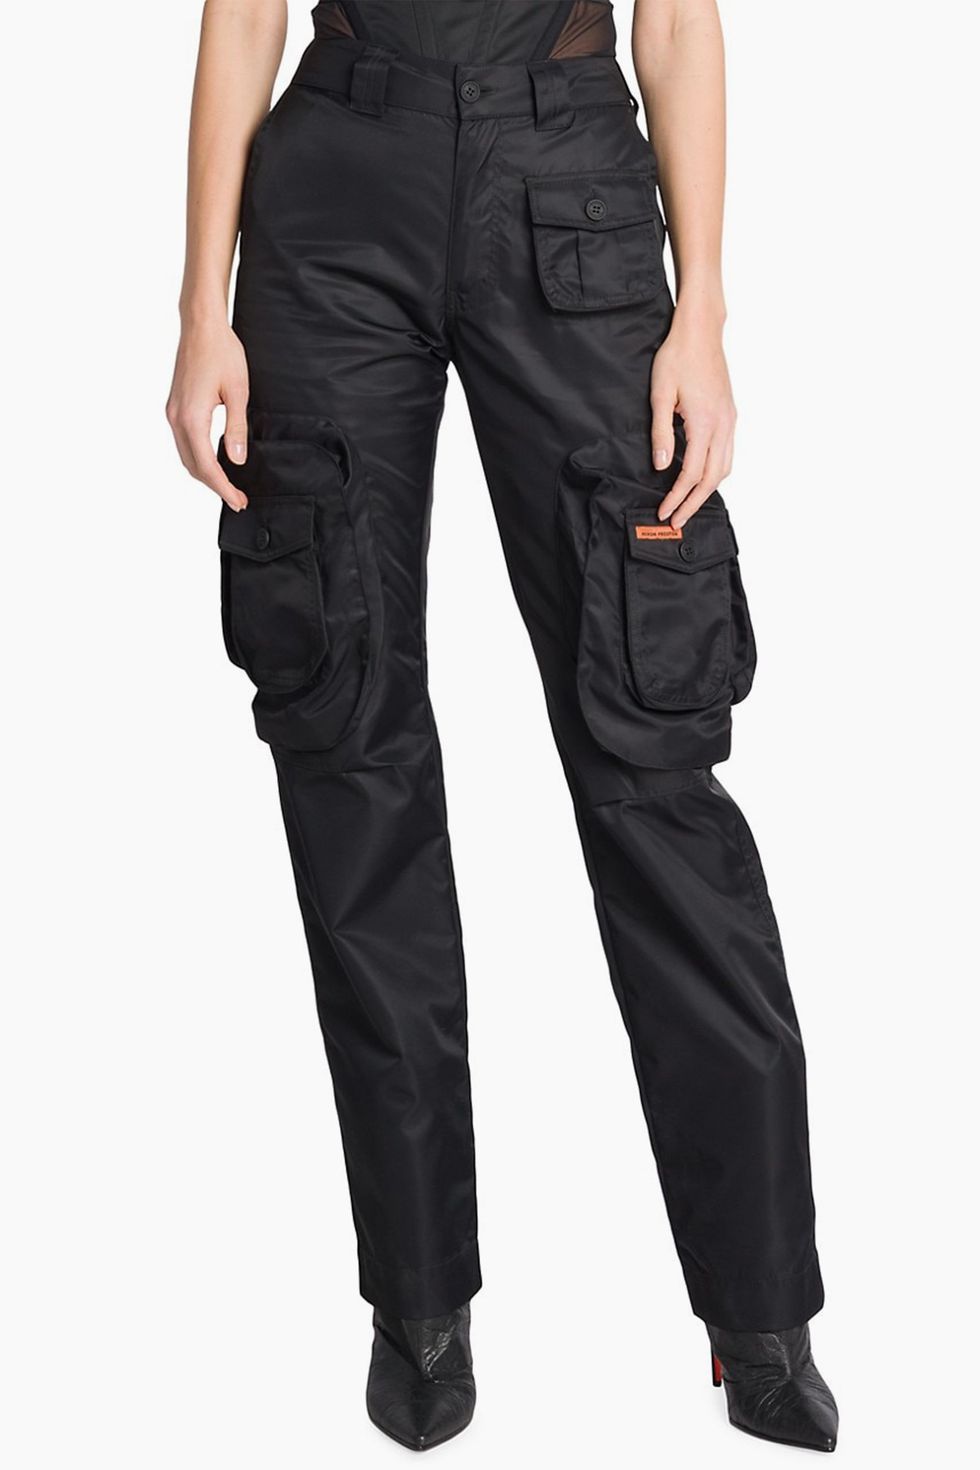 Denim Who? Here's the Best Cargo Pants at ASOS